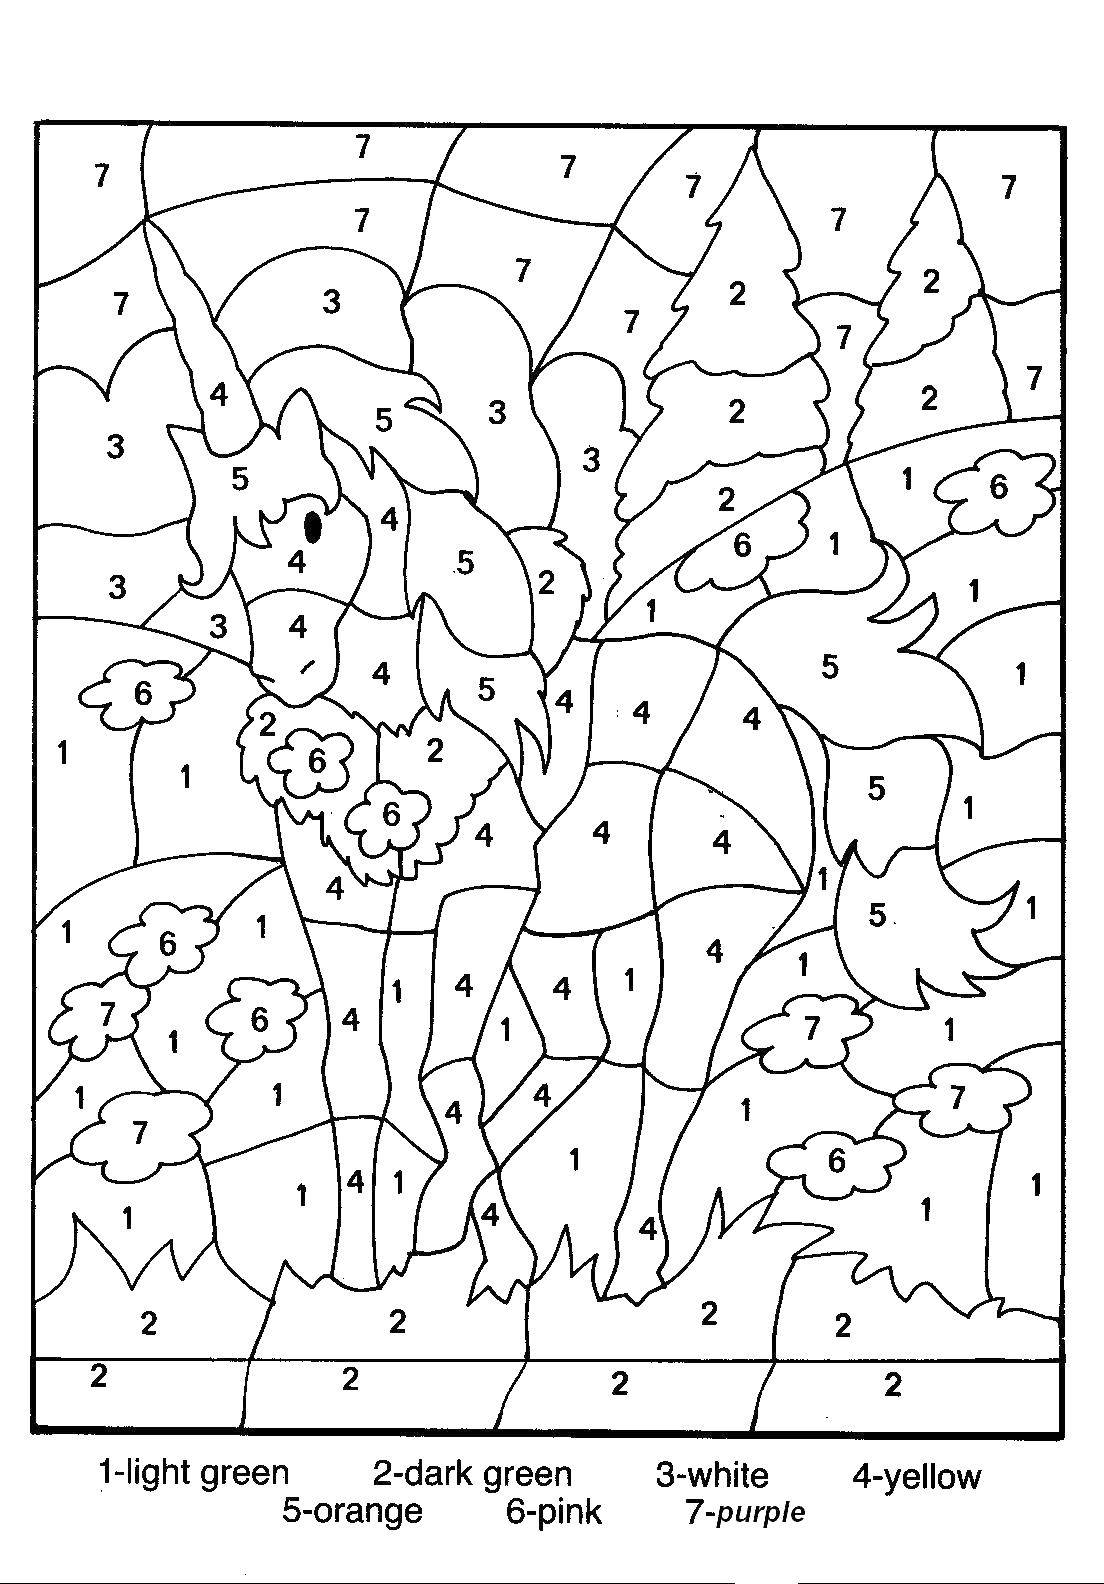 Coloring Unicorn coloring by numbers. Category coloring by numbers. Tags:  through the floor, the unicorn.